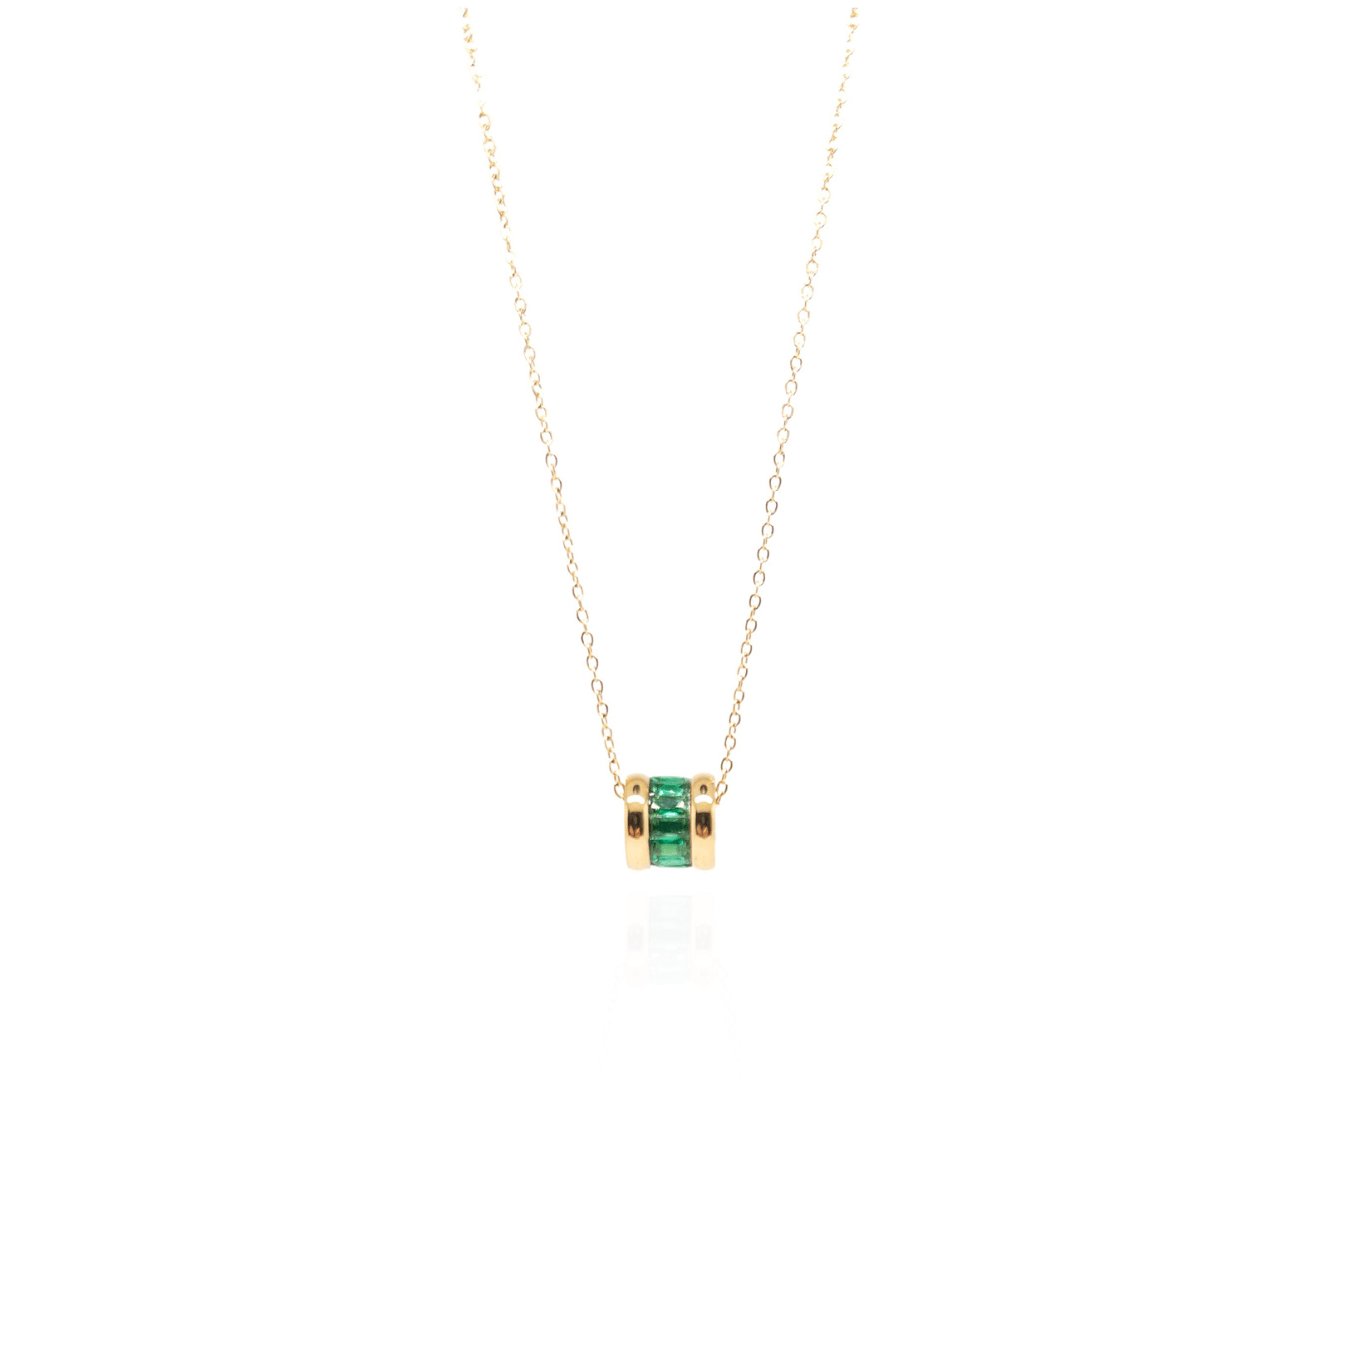 The Green Zircon ring Necklace